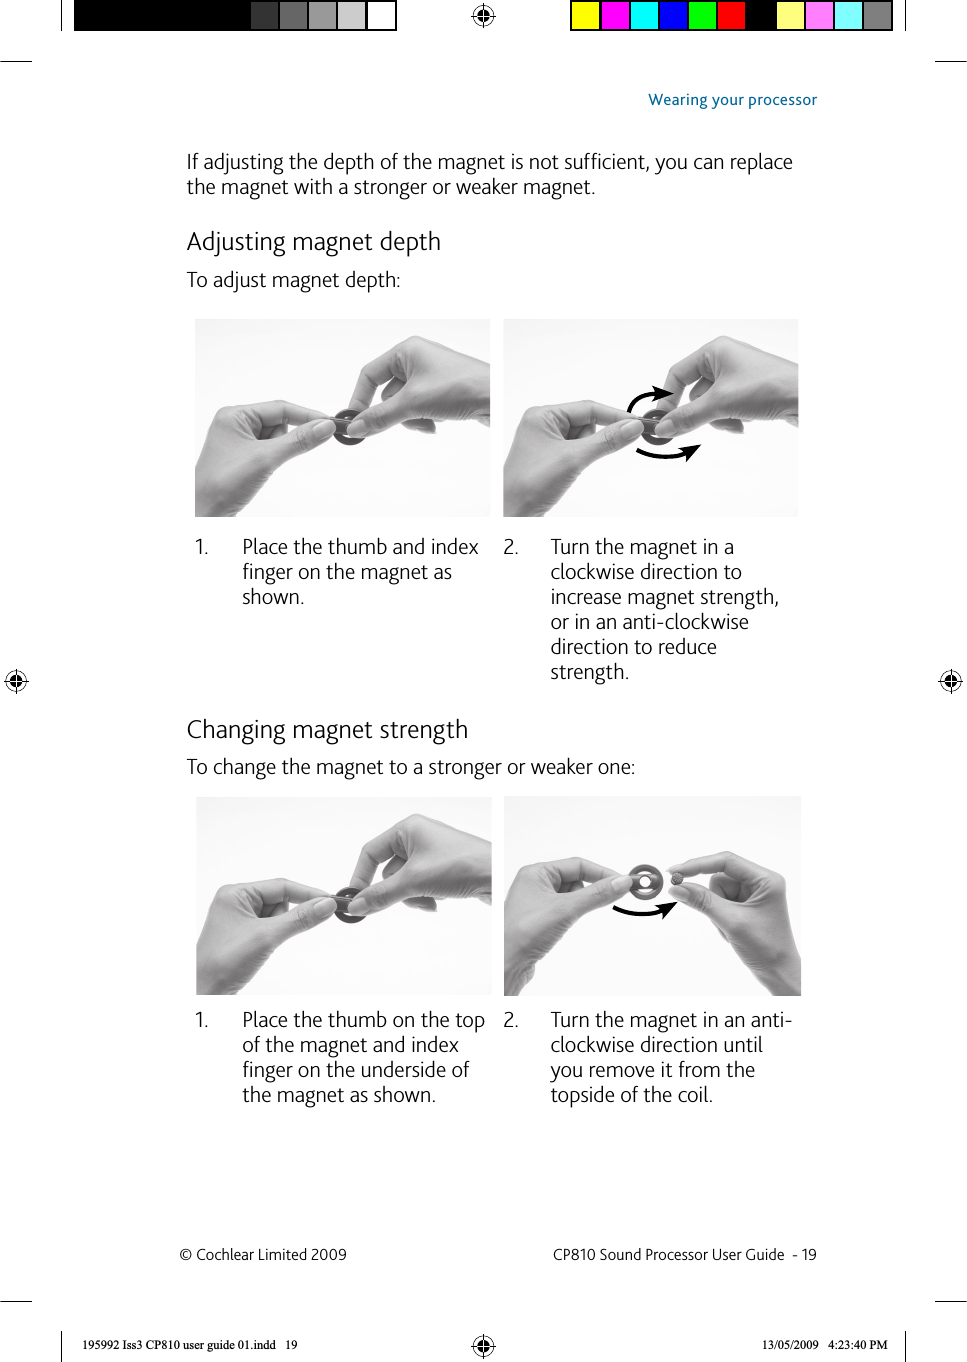 If adjusting the depth of the magnet is not sufﬁ cient, you can replace the magnet with a stronger or weaker magnet. Adjusting magnet depthTo adjust magnet depth:Place the thumb and index 1. ﬁ nger on the magnet as shown.Turn the magnet in a 2. clockwise direction to increase magnet strength, or in an anti-clockwise direction to reduce strength. Changing magnet strengthTo change the magnet to a stronger or weaker one:Place the thumb on the top 1. of the magnet and index ﬁ nger on the underside of the magnet as shown.Turn the magnet in an anti-2. clockwise direction until you remove it from the topside of the coil.© Cochlear Limited 2009  CP810 Sound Processor User Guide  - 19Wearing your processor195992 Iss3 CP810 user guide 01.indd   19 13/05/2009   4:23:40 PM